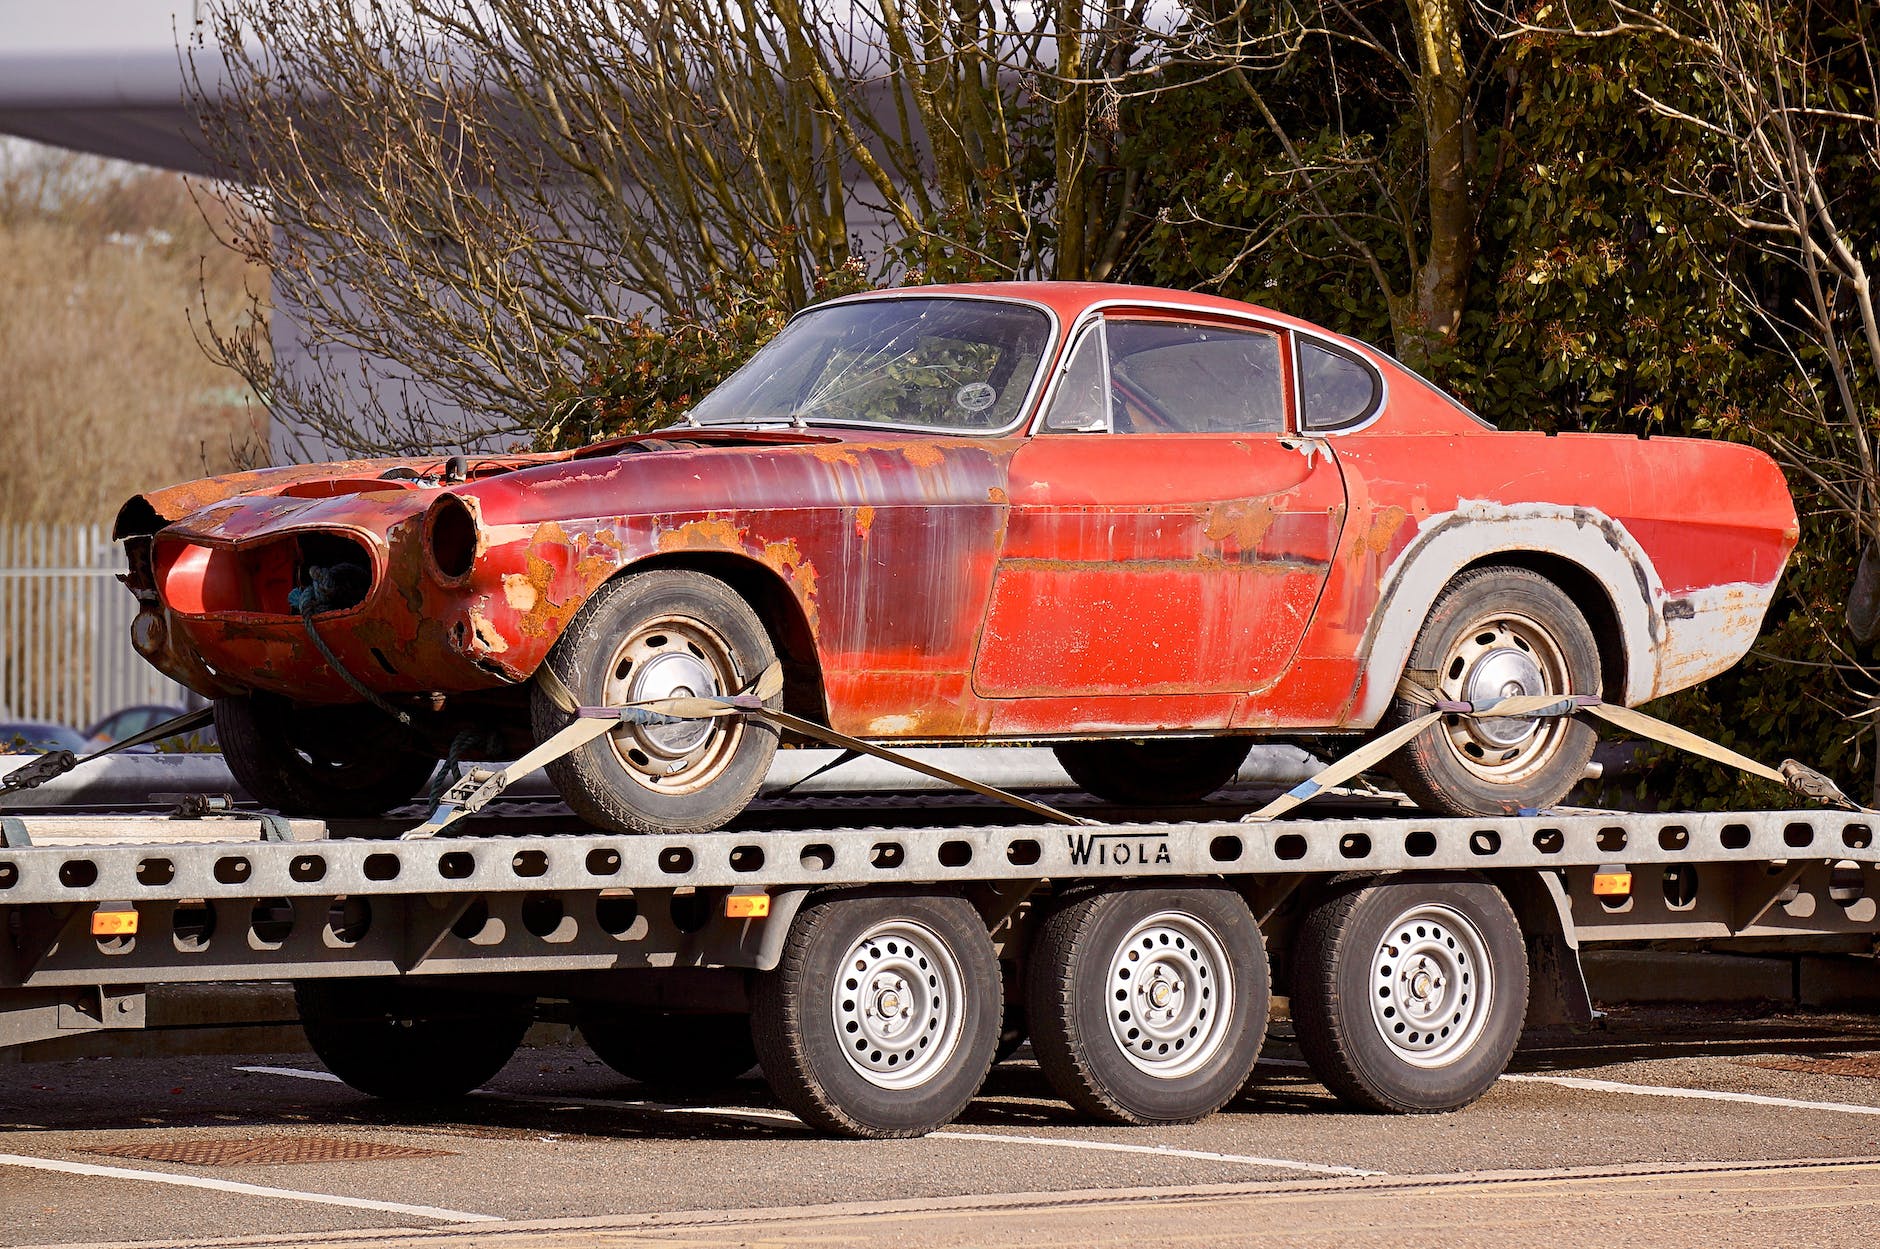 tow truck dublin: fast, efficient roadside recovery services